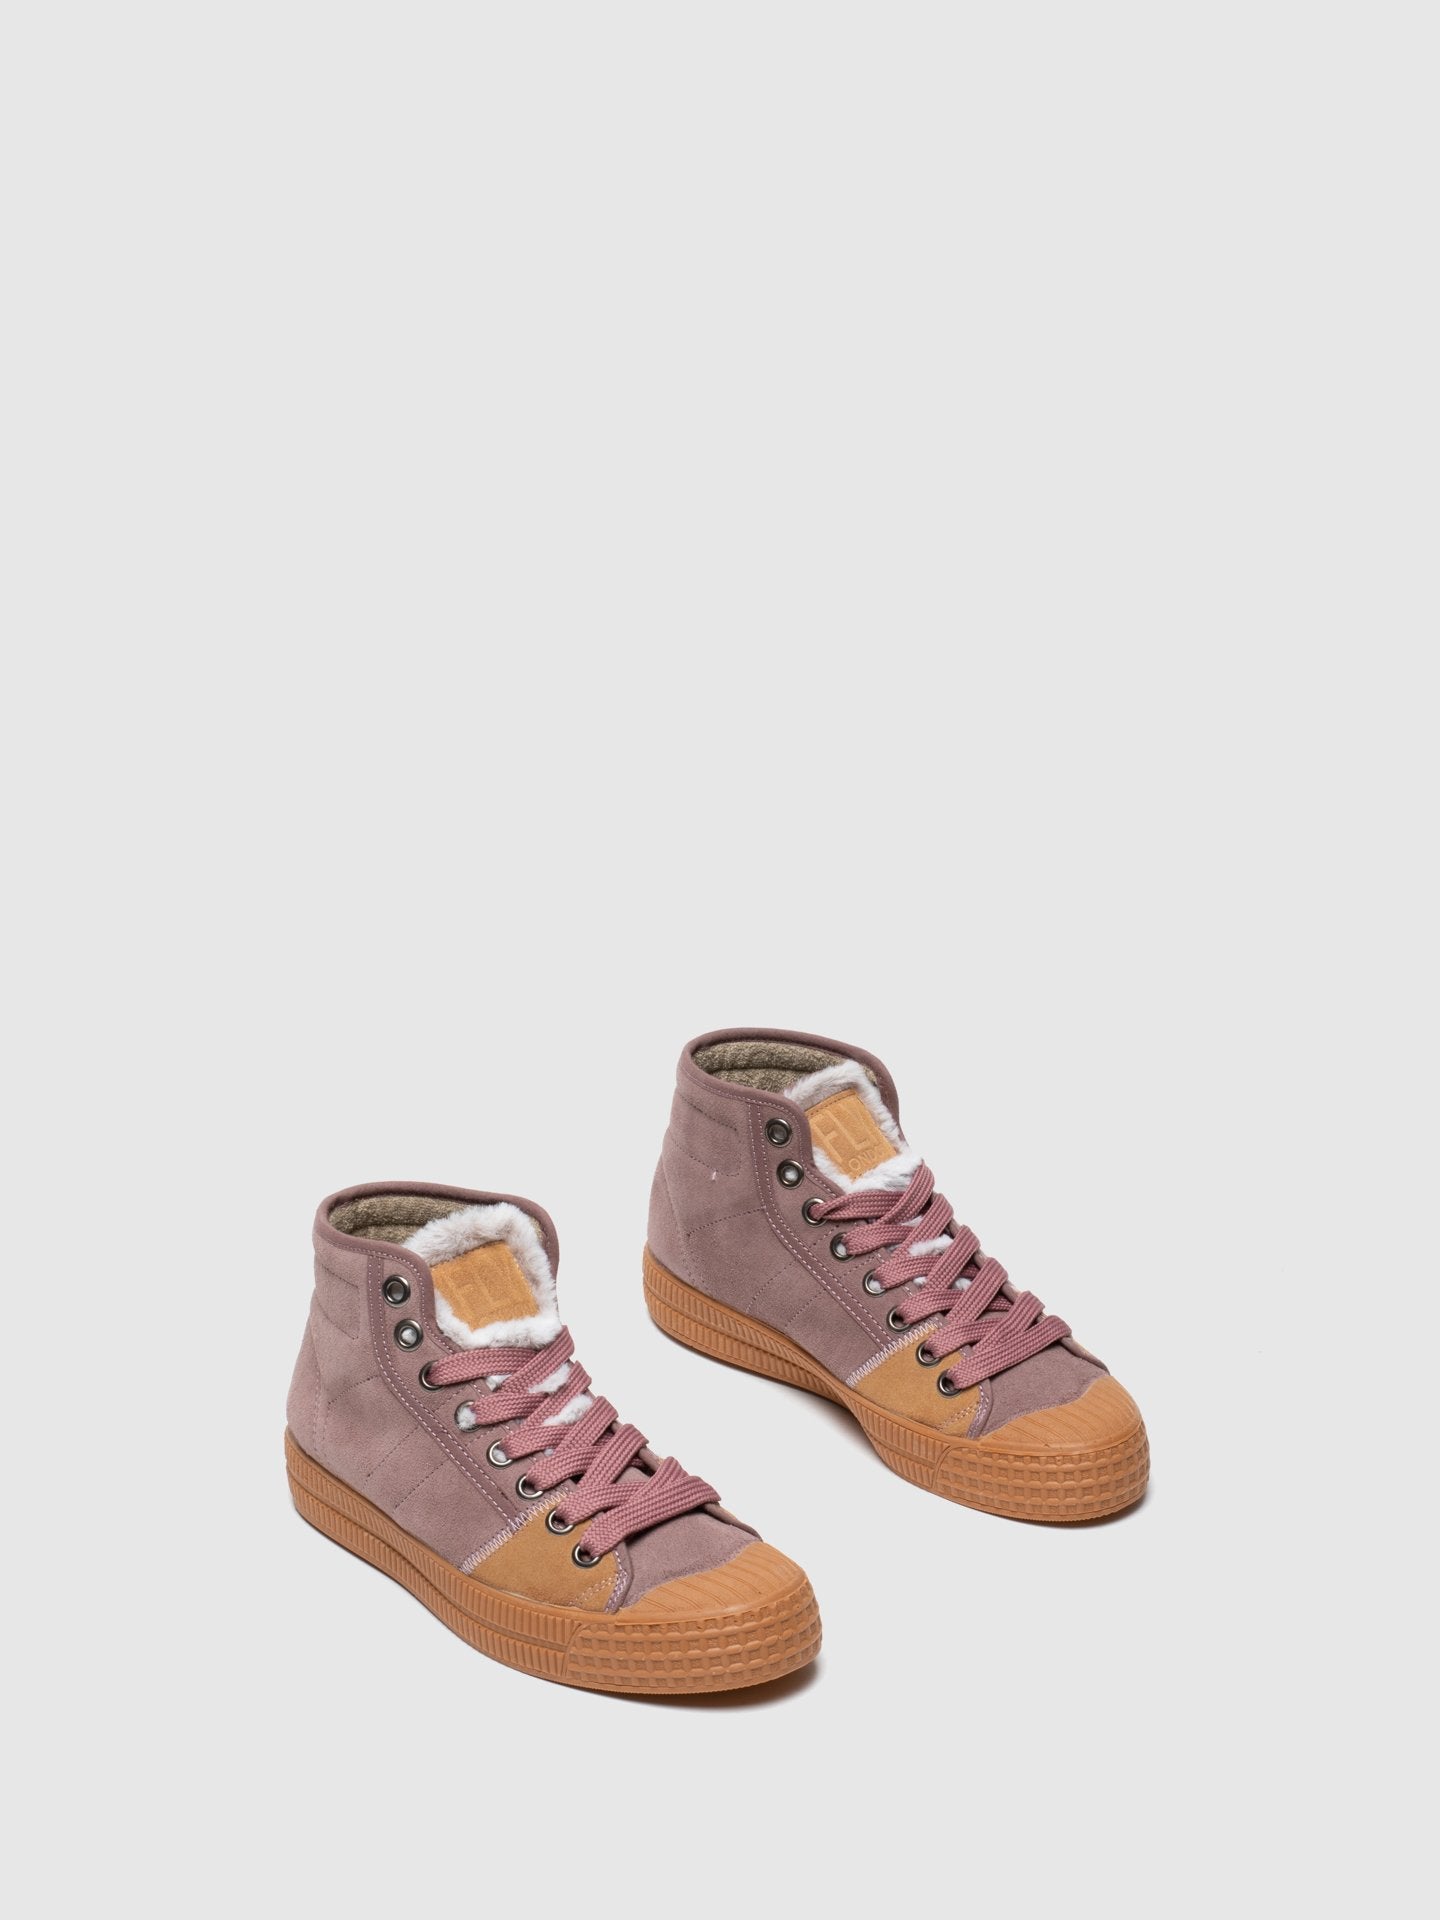 Fly London Pink Hi-Top Trainers